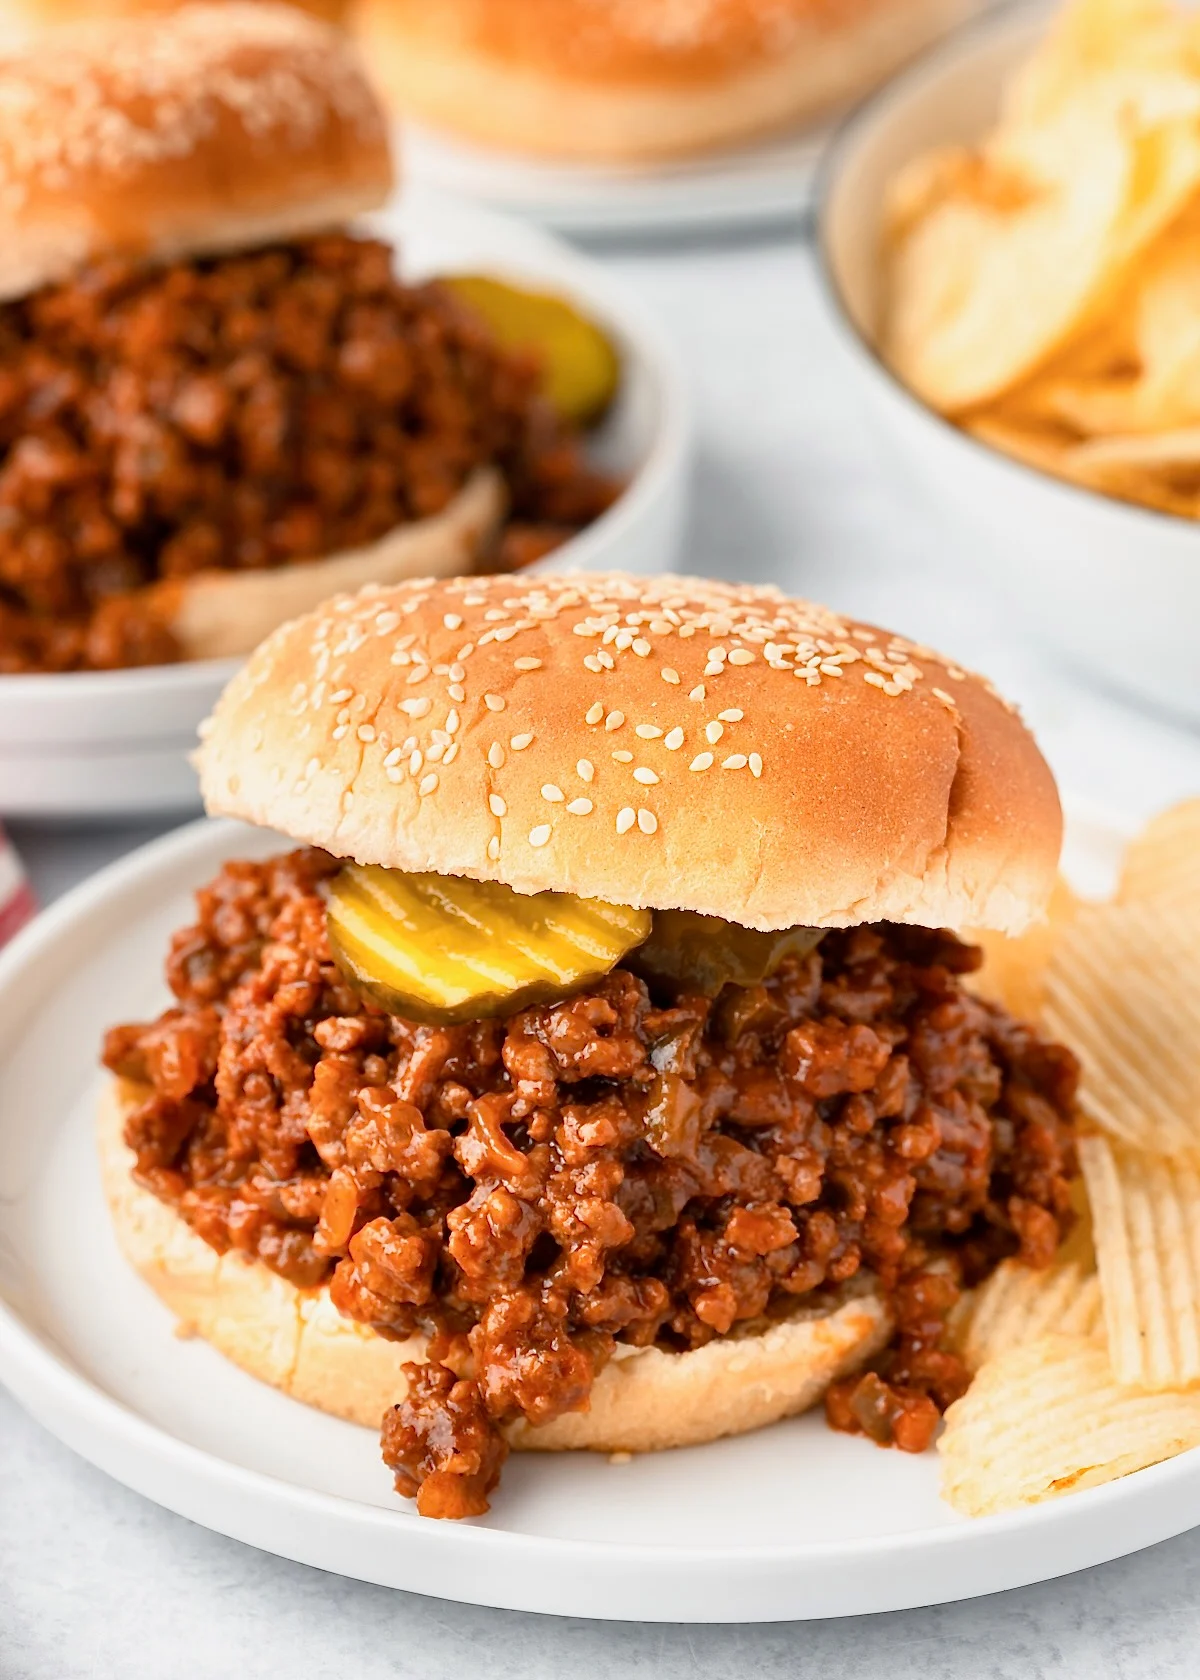 This photo shows a Sloppy Joe sandwich on sesame bun with pickles on a white plate with potato chips. 